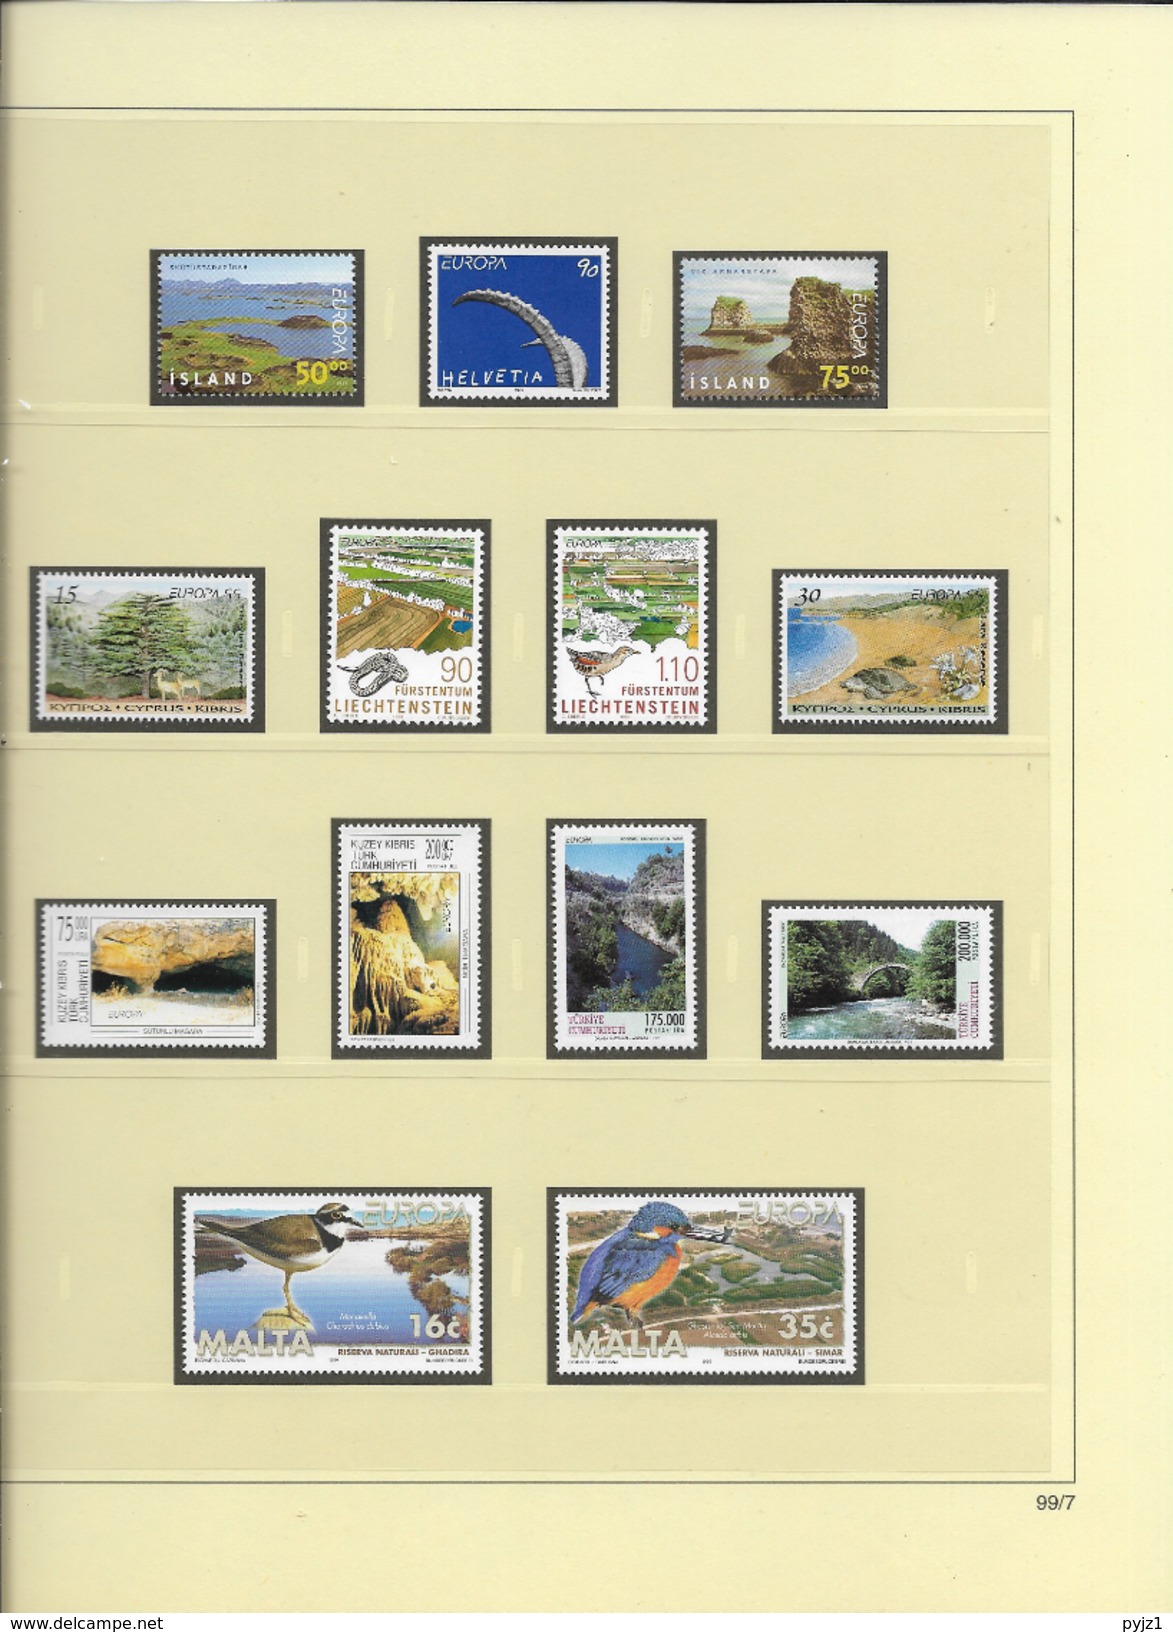 1999 MNH CEPT year collection according to SAFE album, (11 scans) postfris**